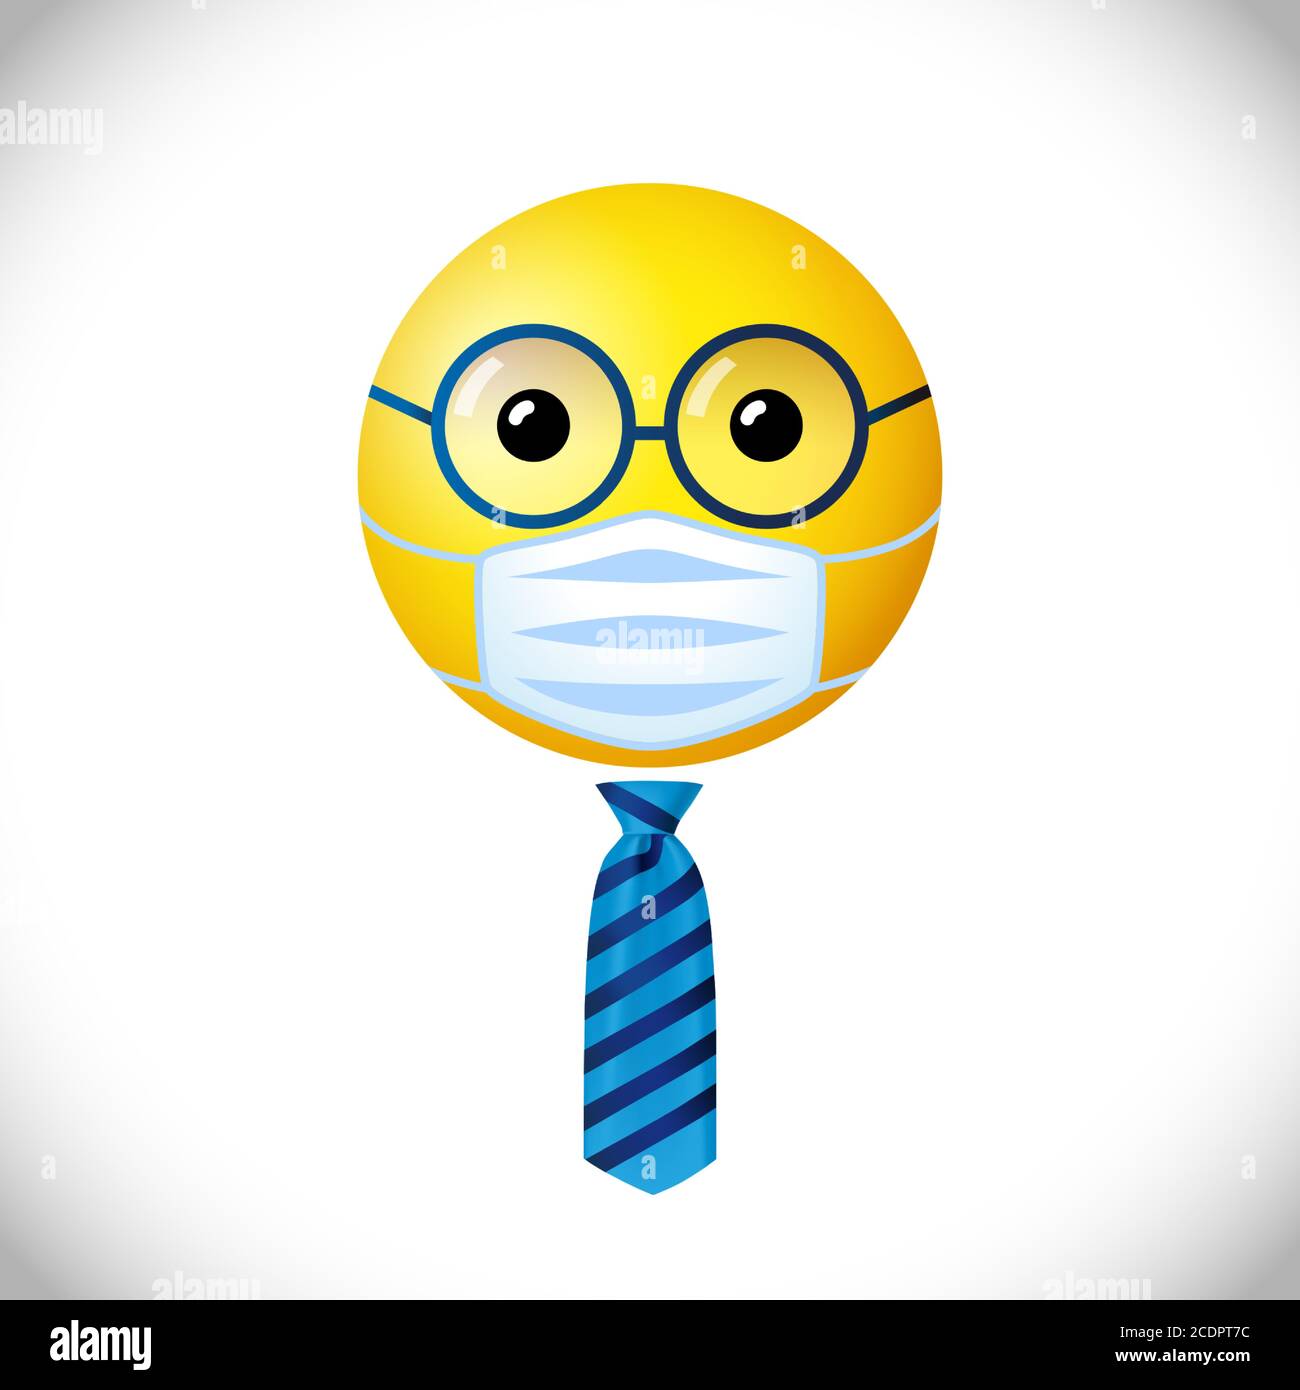 Businessman with medical mask emoji icon. Happy world day creative congrats. Isolated abstract graphic design template. Smile sign Cute  yellow symbol Stock Vector